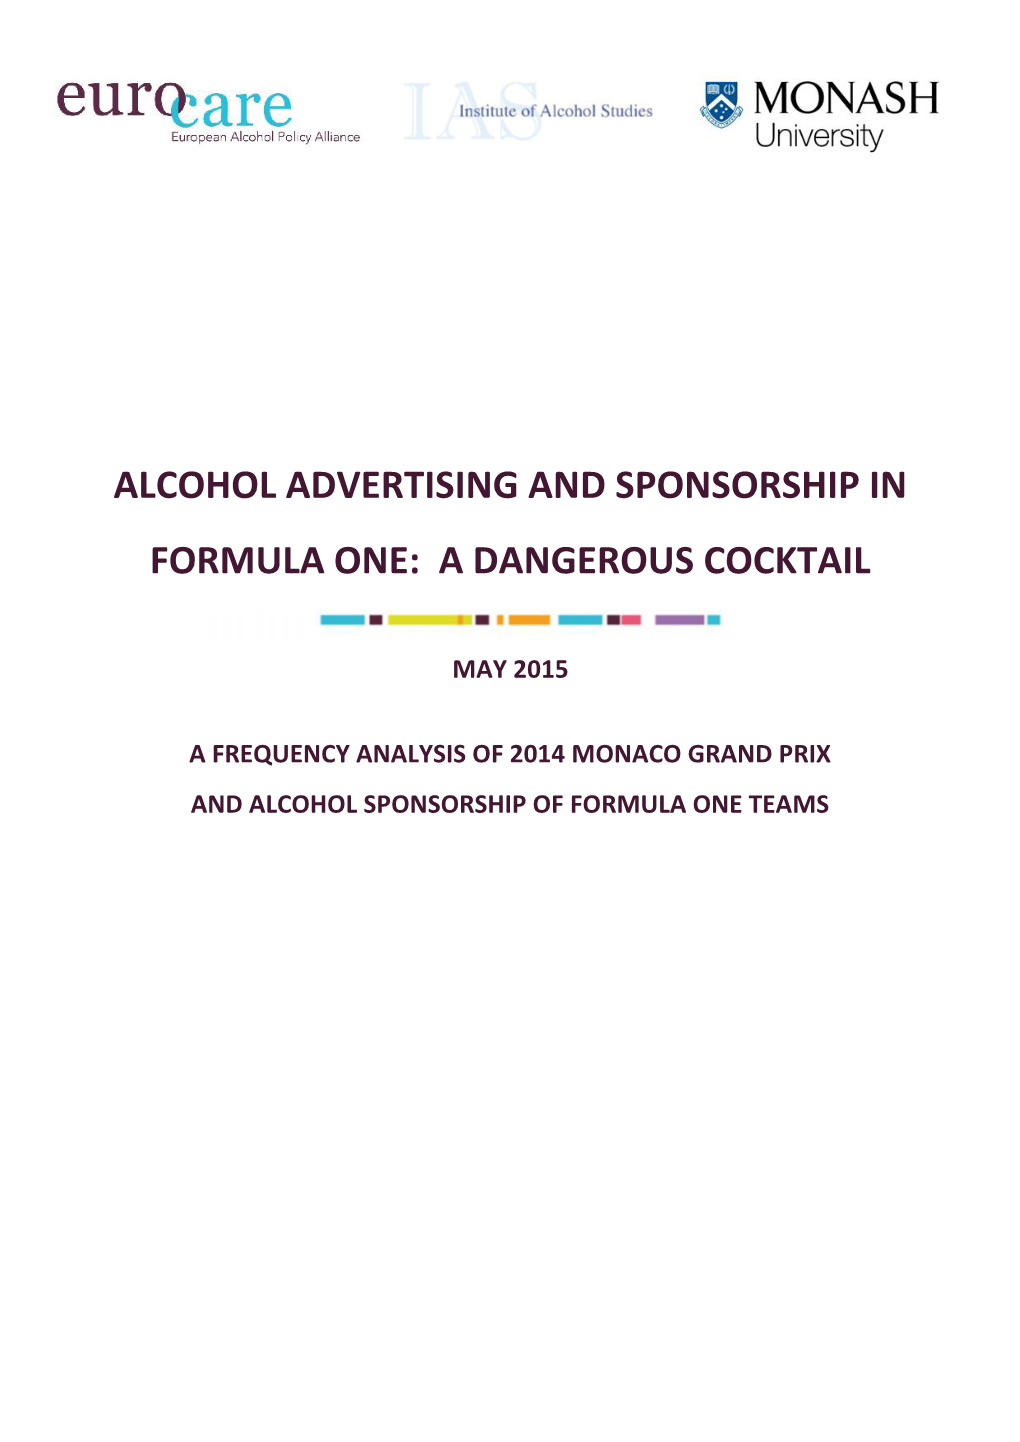 Alcohol Advertising and Sponsorship in Formula One: a Dangerous Cocktail